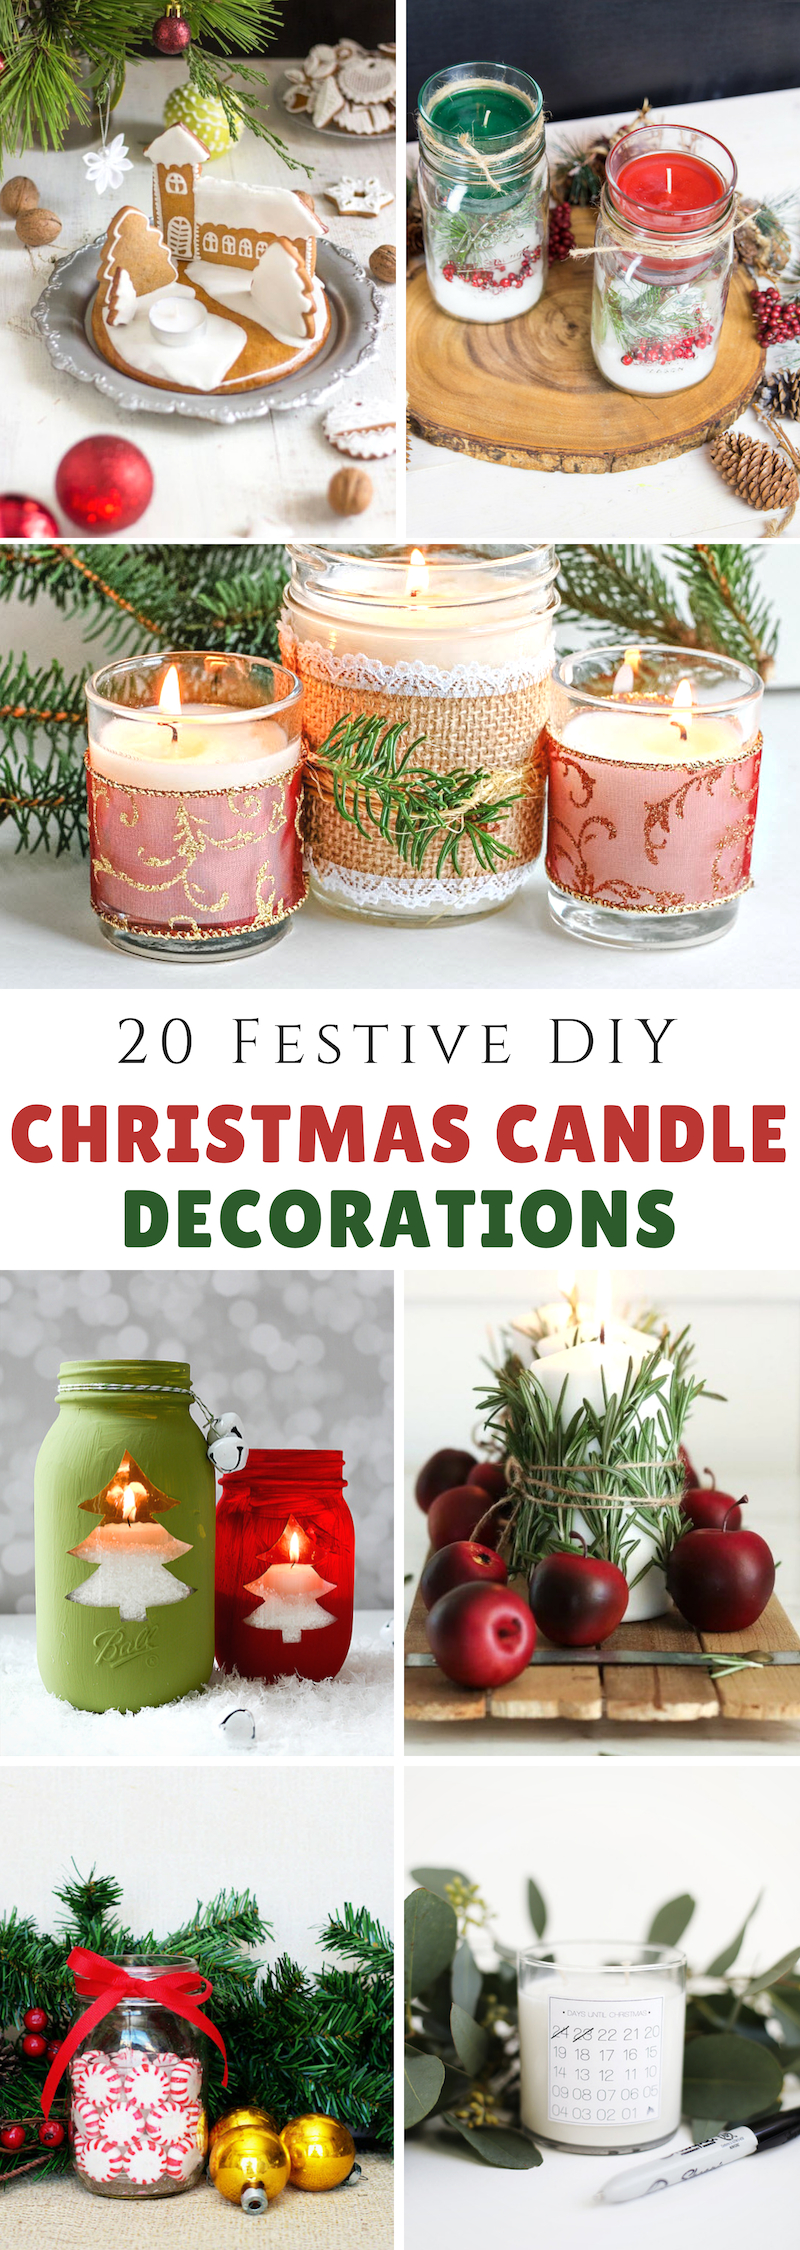 DIY Christmas Candle Decorations 